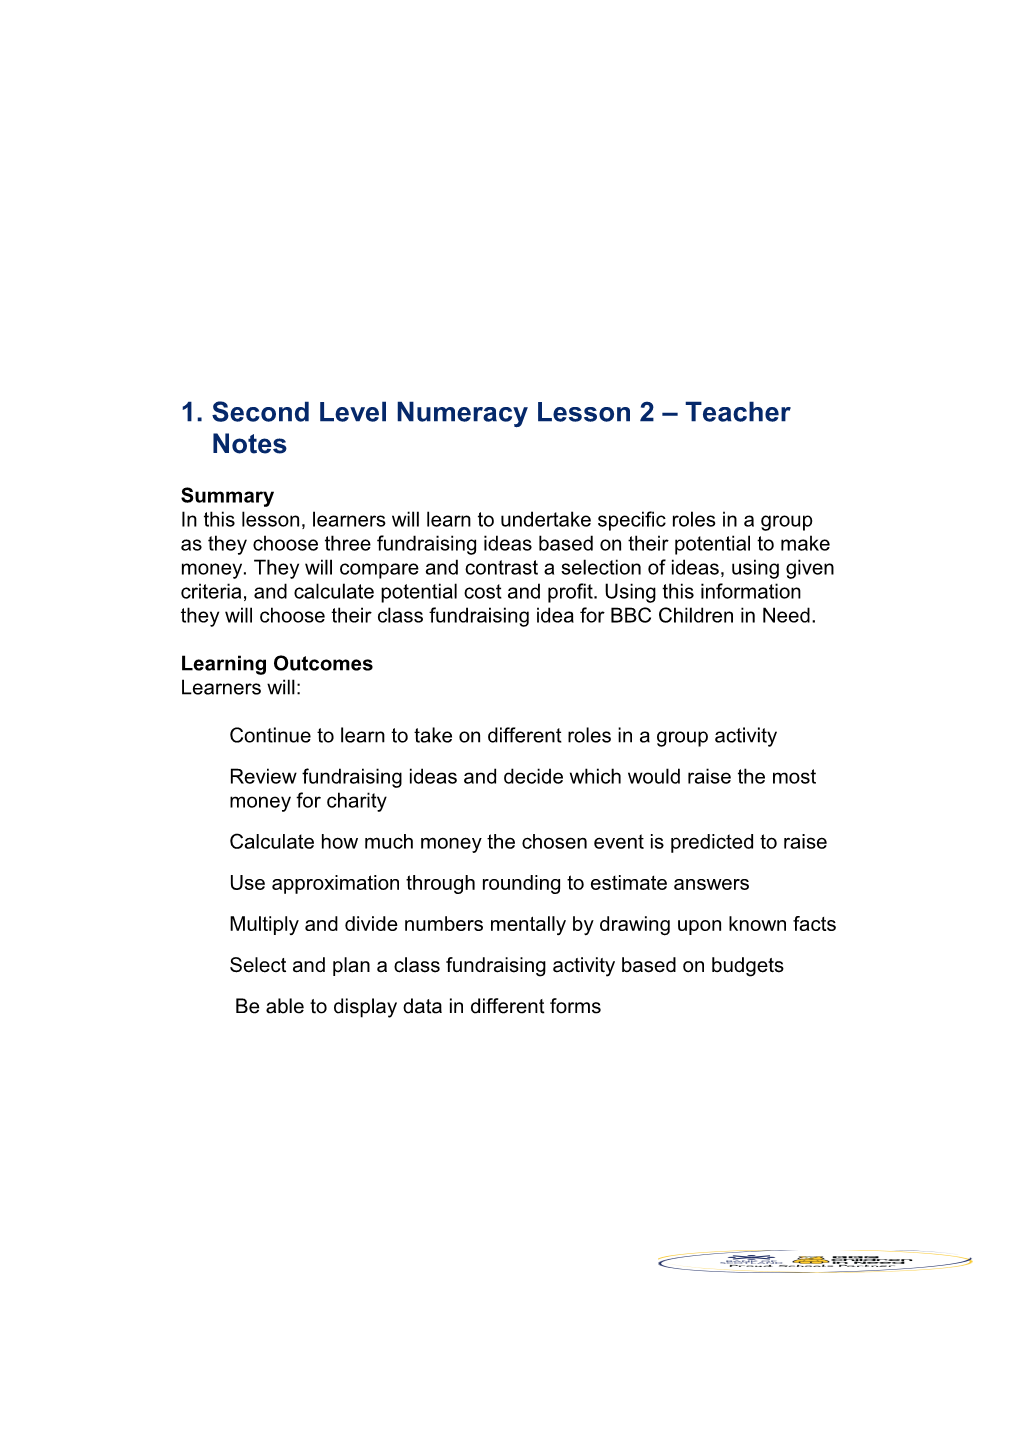 Second Level Numeracy Lesson 2 Teacher Notes